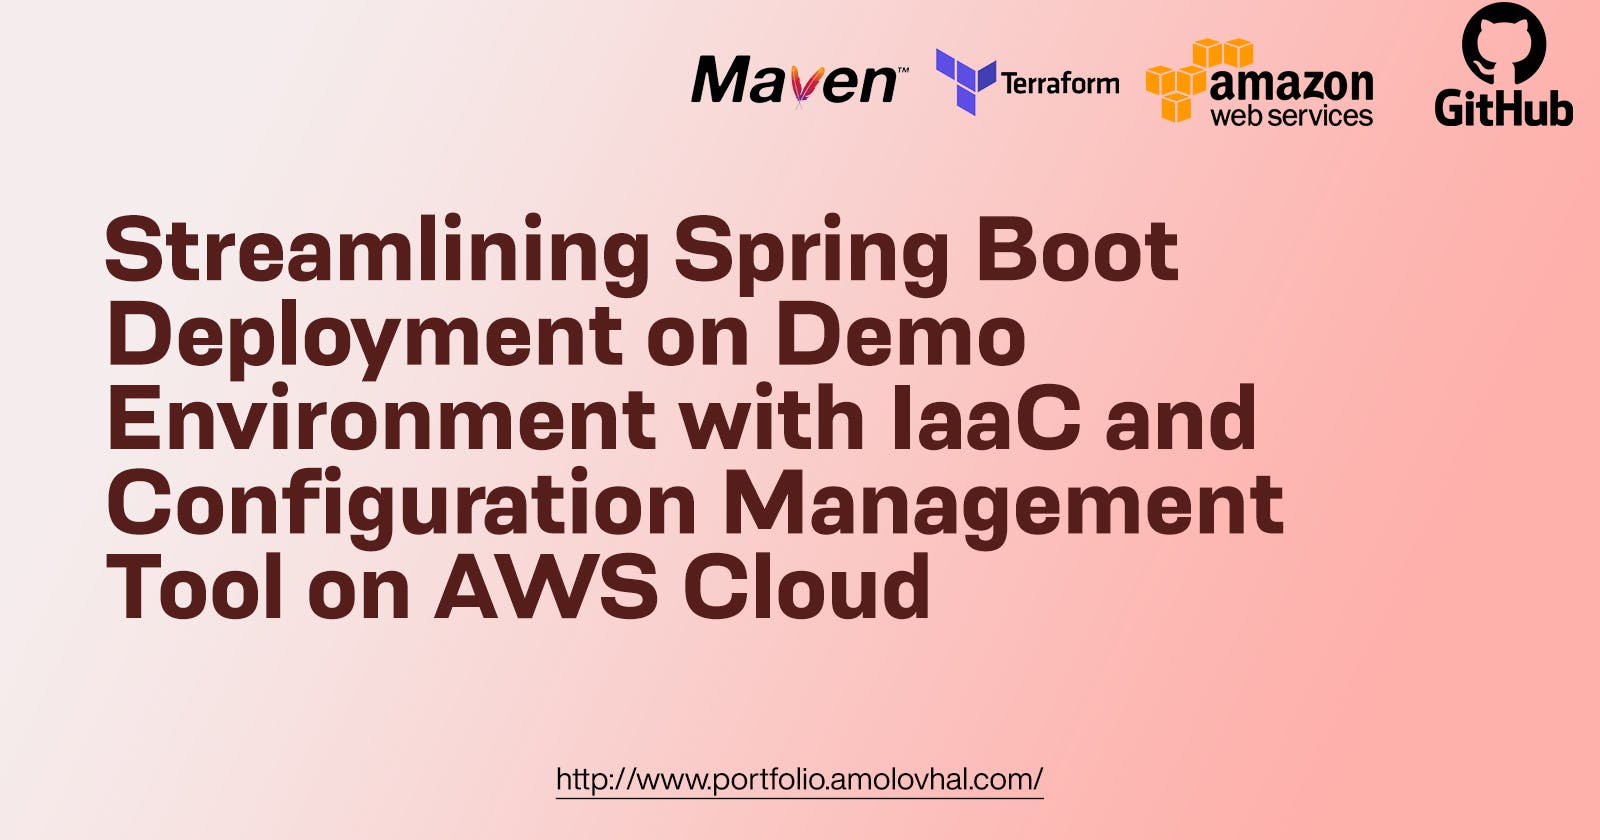 Project: Streamlining Spring Boot Deployment on Demo Environment with IaaC and Configuration Management Tool on AWS Cloud.